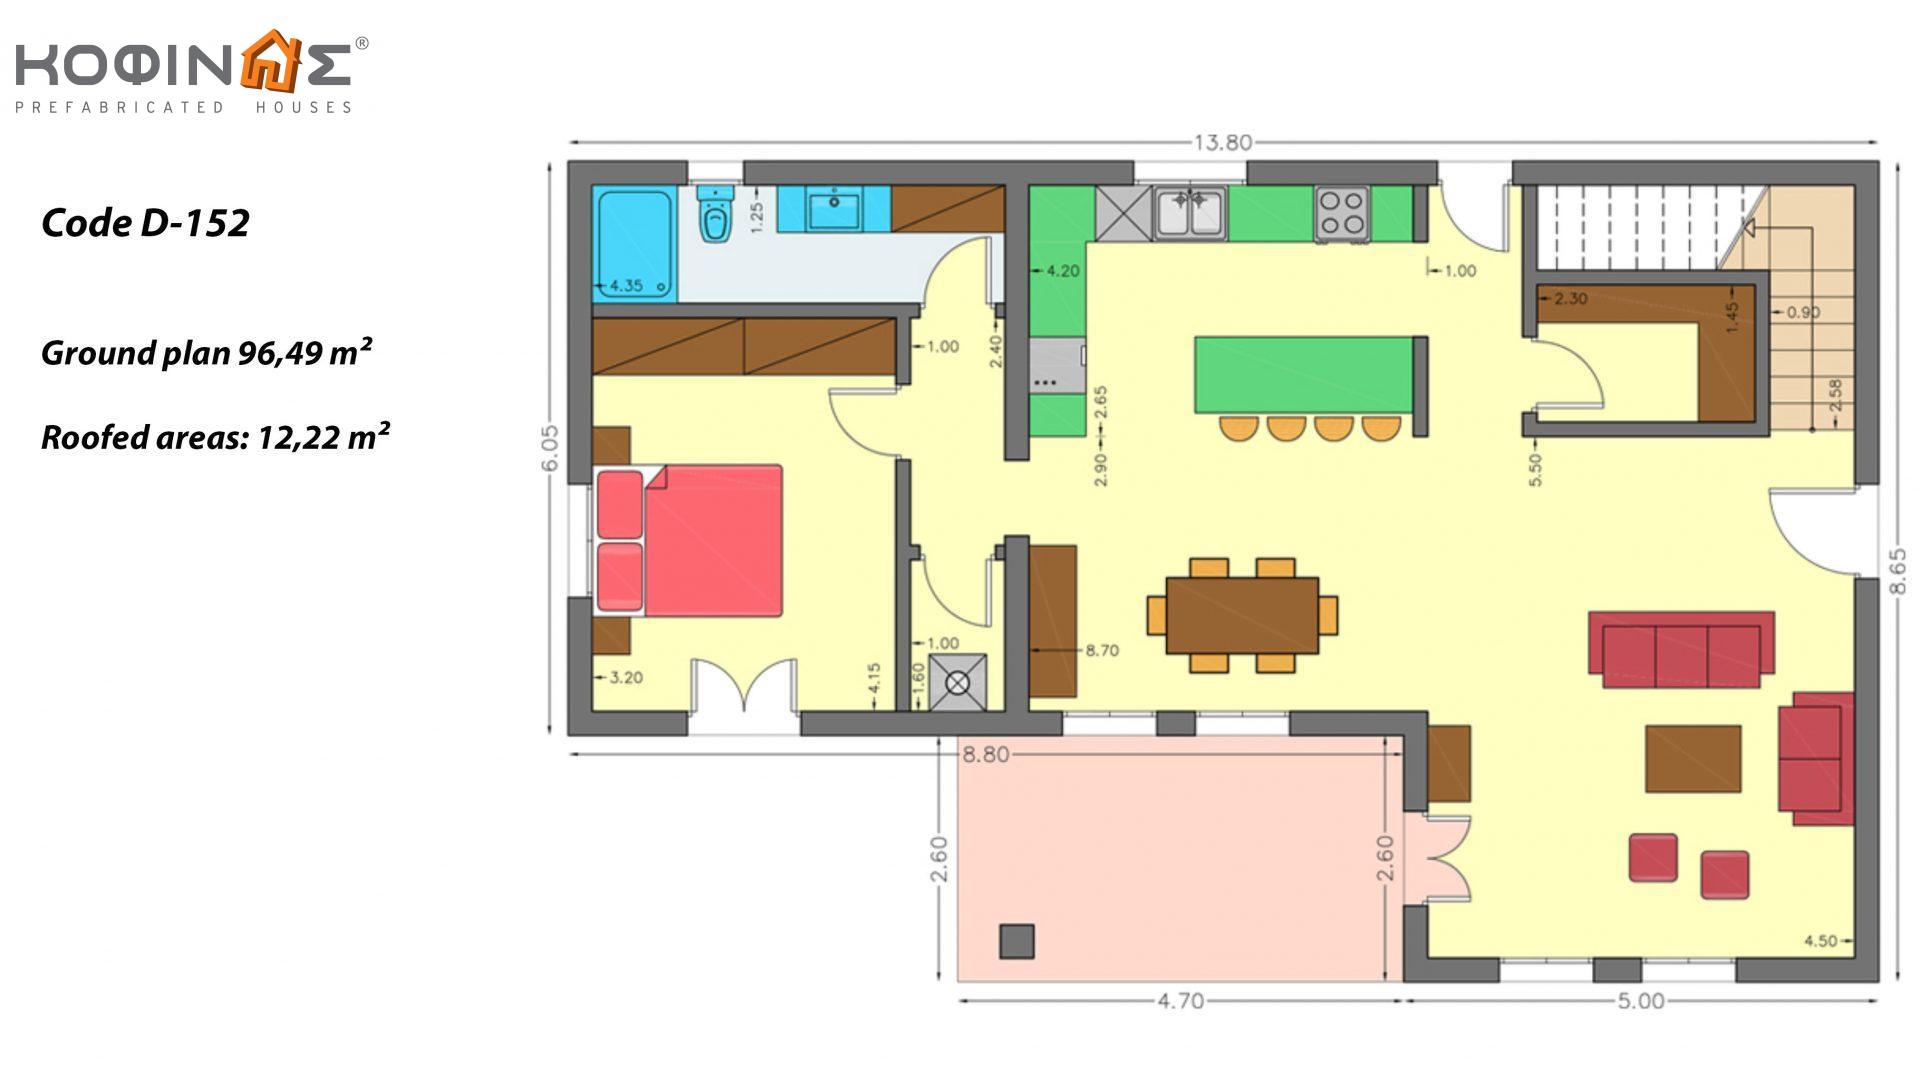 2-story house D-152, total surface of 152,15 m²,covered roofed areas 12.22 m²,balconies 40.83 m²